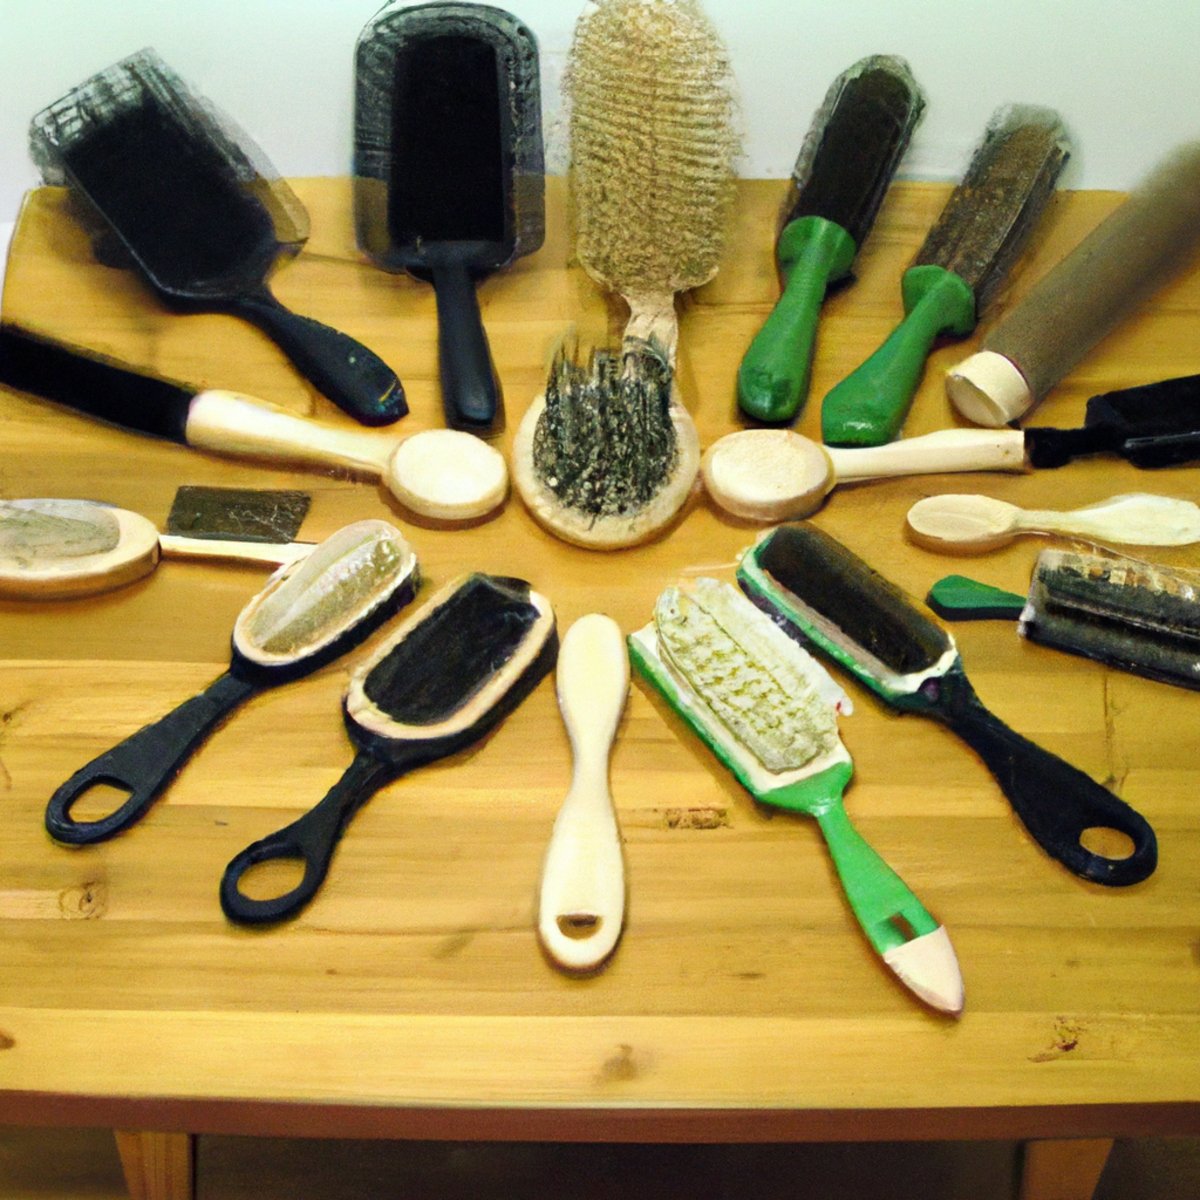 Assorted hairbrushes and hair care products on a wooden table, emphasizing the importance of choosing the right brush for different hair types.